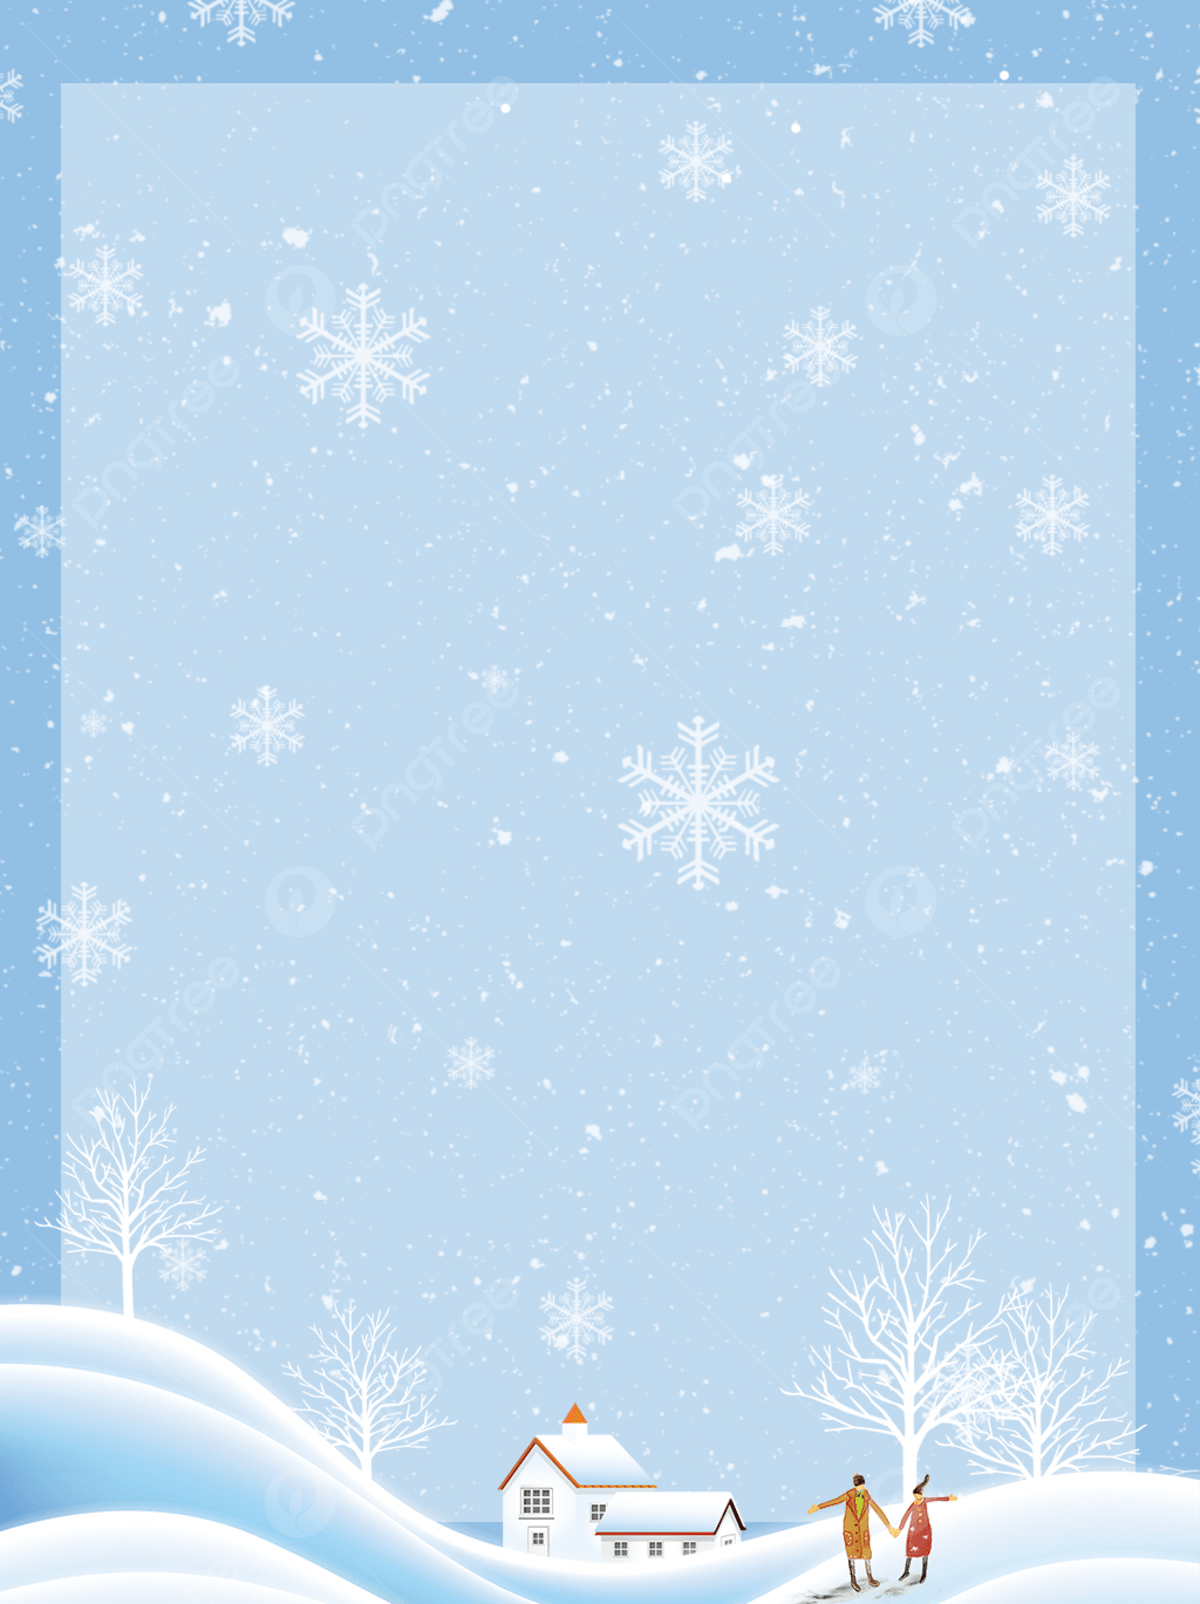 Creative Aesthetic Paper Cut Wind Winter Snowflake Background Illustration Wallpaper Image For Free Download